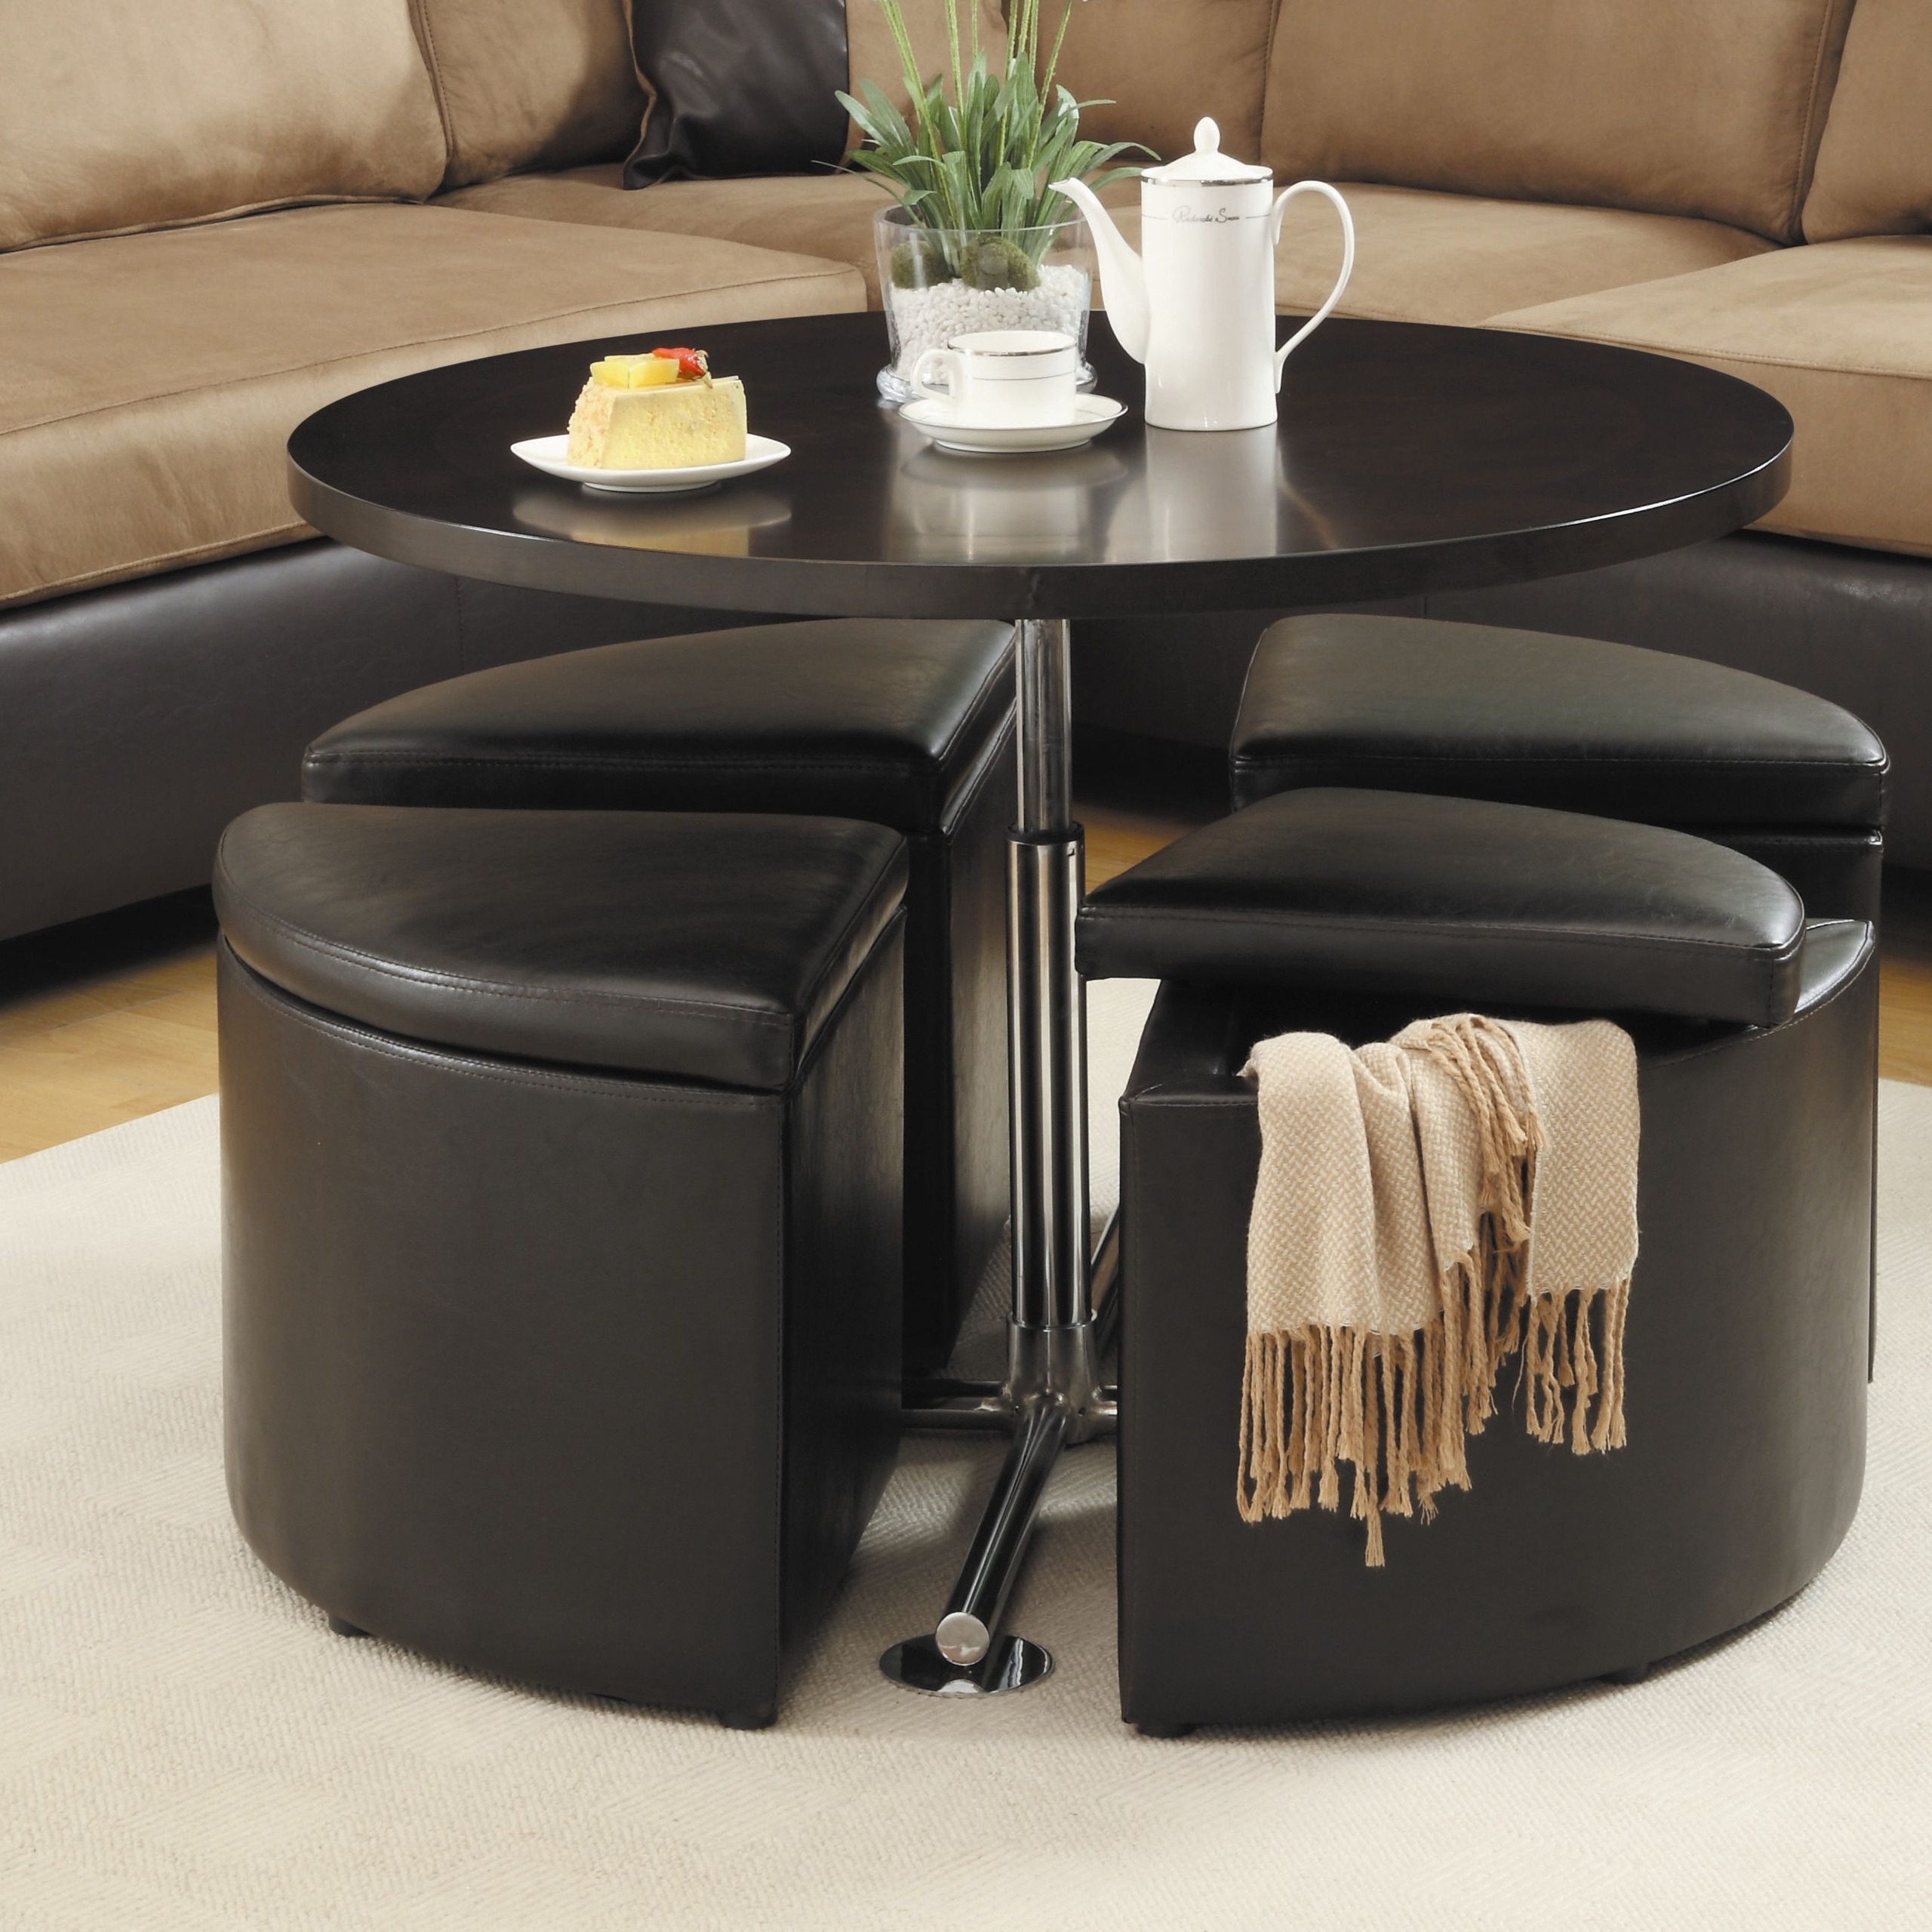 Homelegance Home Creek Hydraulic Lift Cocktail Table with Storage Ottomans, multicolor, Rubberwood